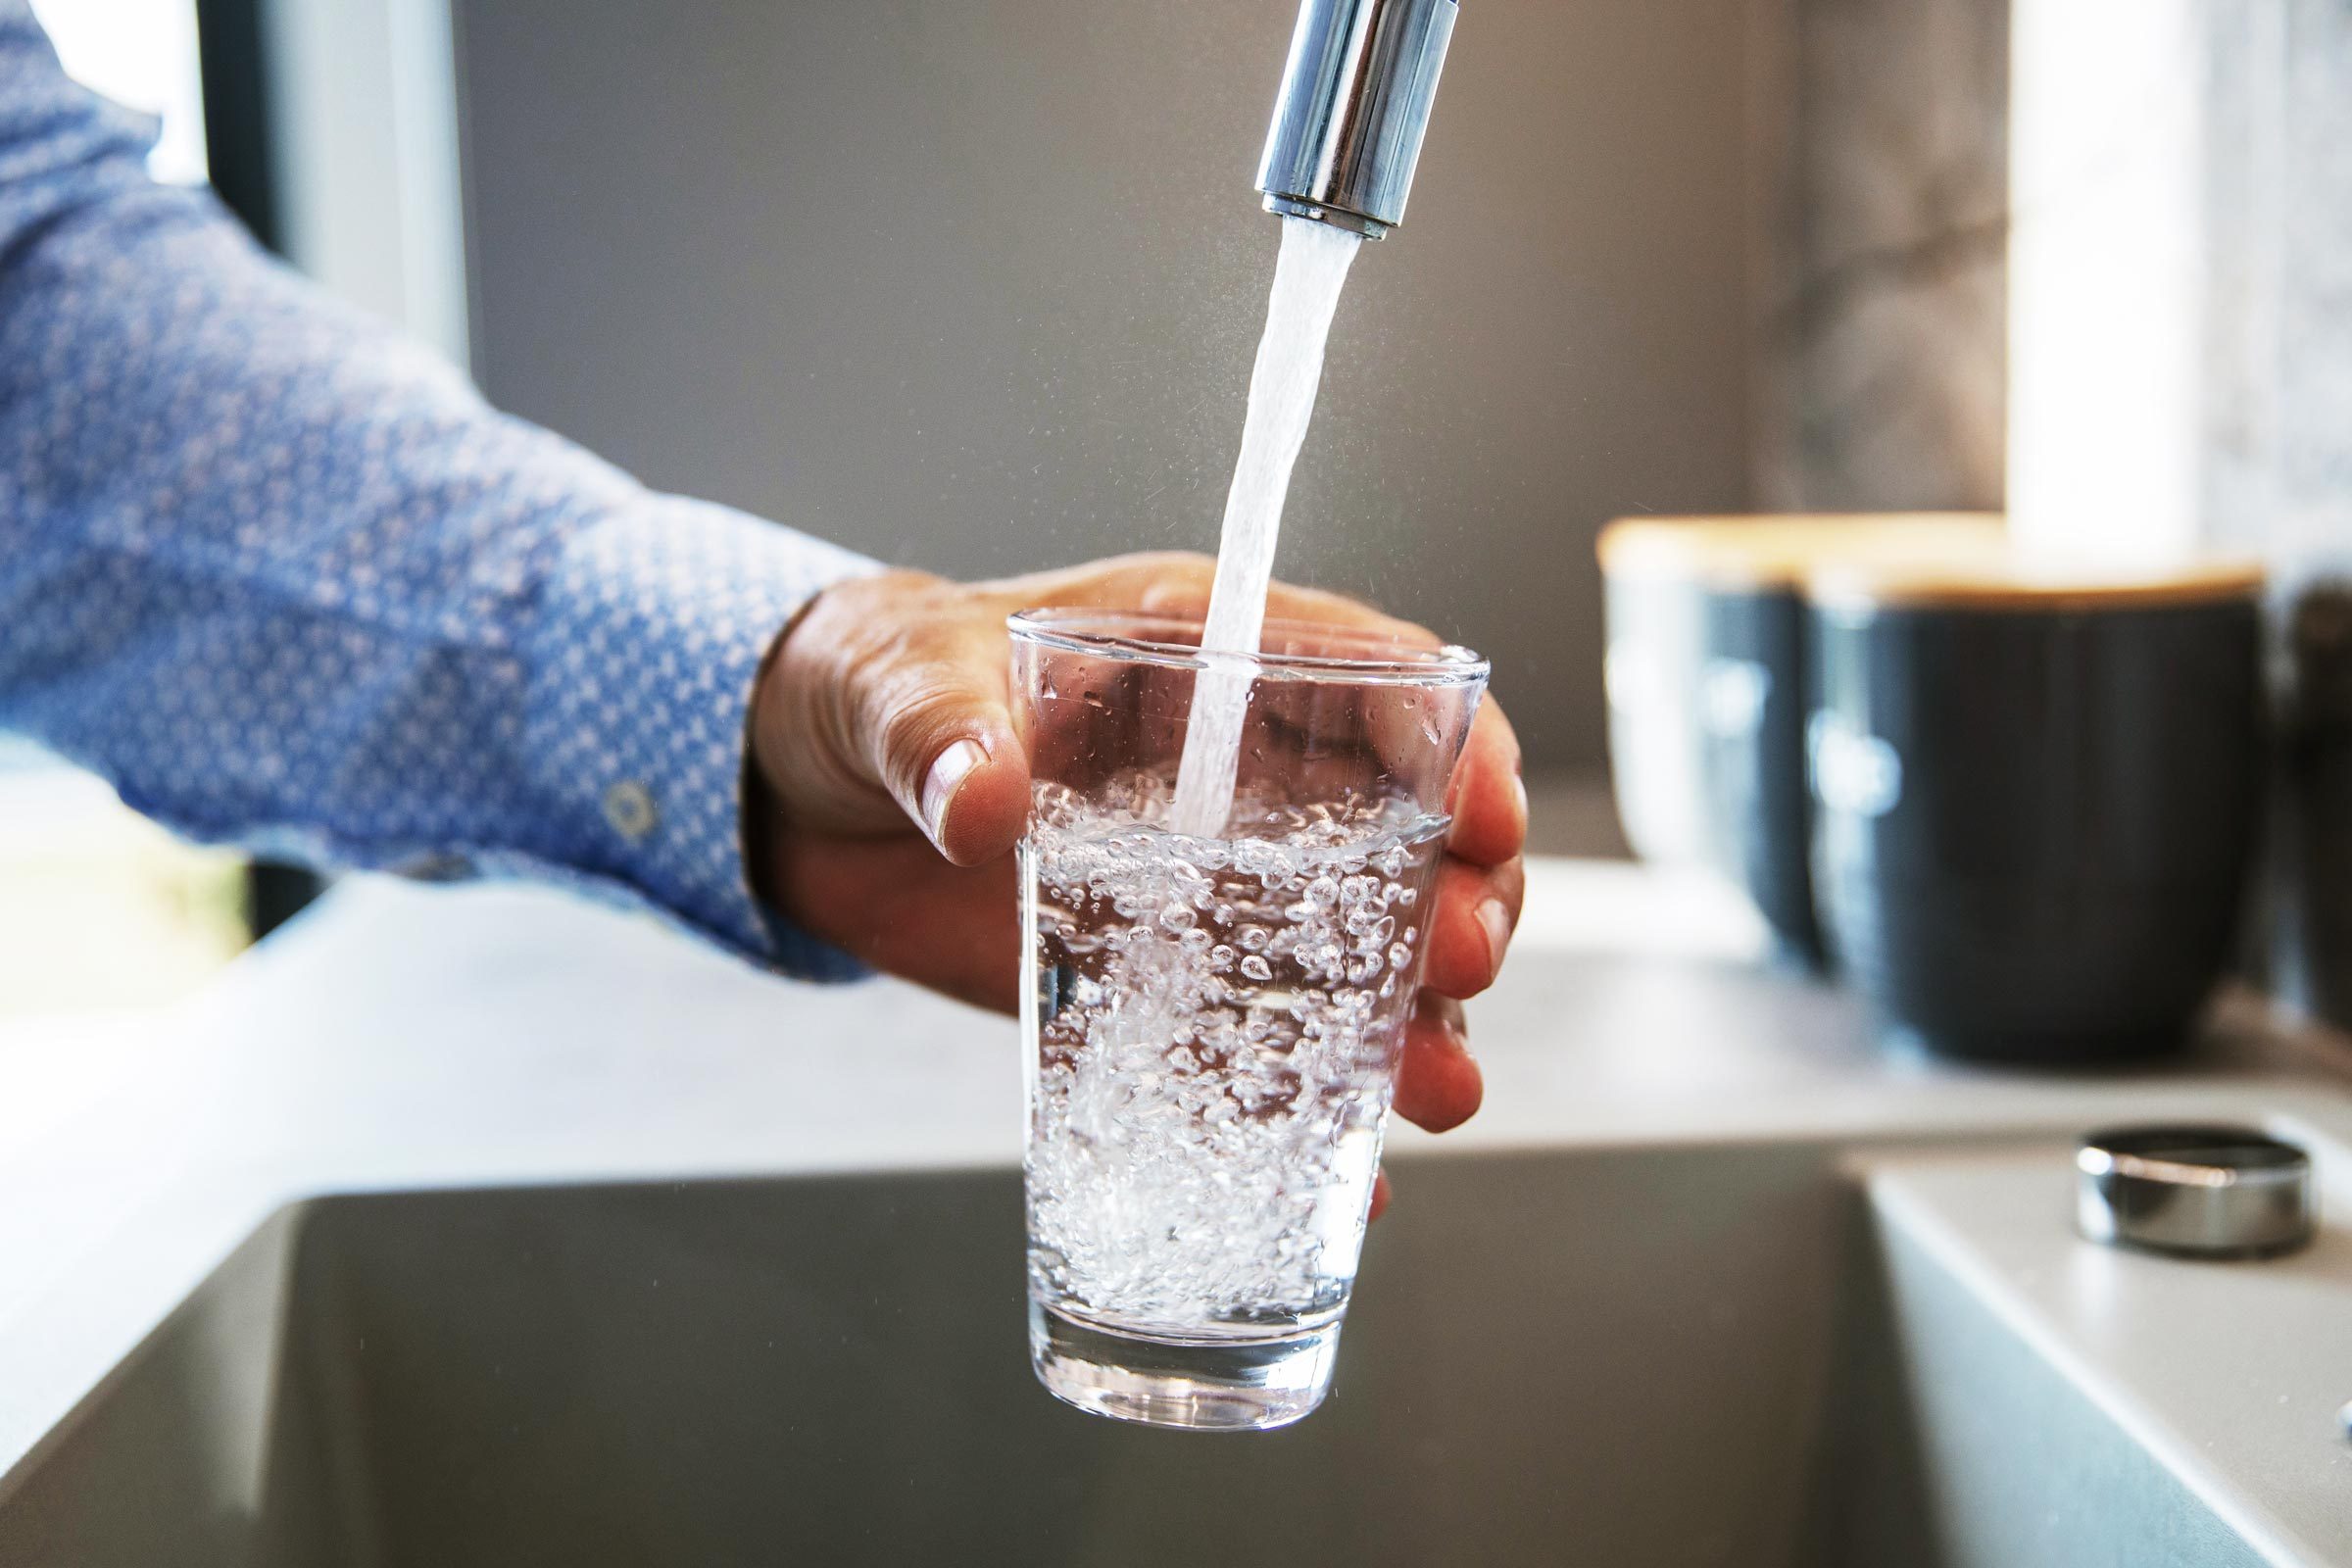 New Study Says Almost 50% of Tap Water Contains Cancer-Related Chemicals—Here's What to Do, Says a Doctor